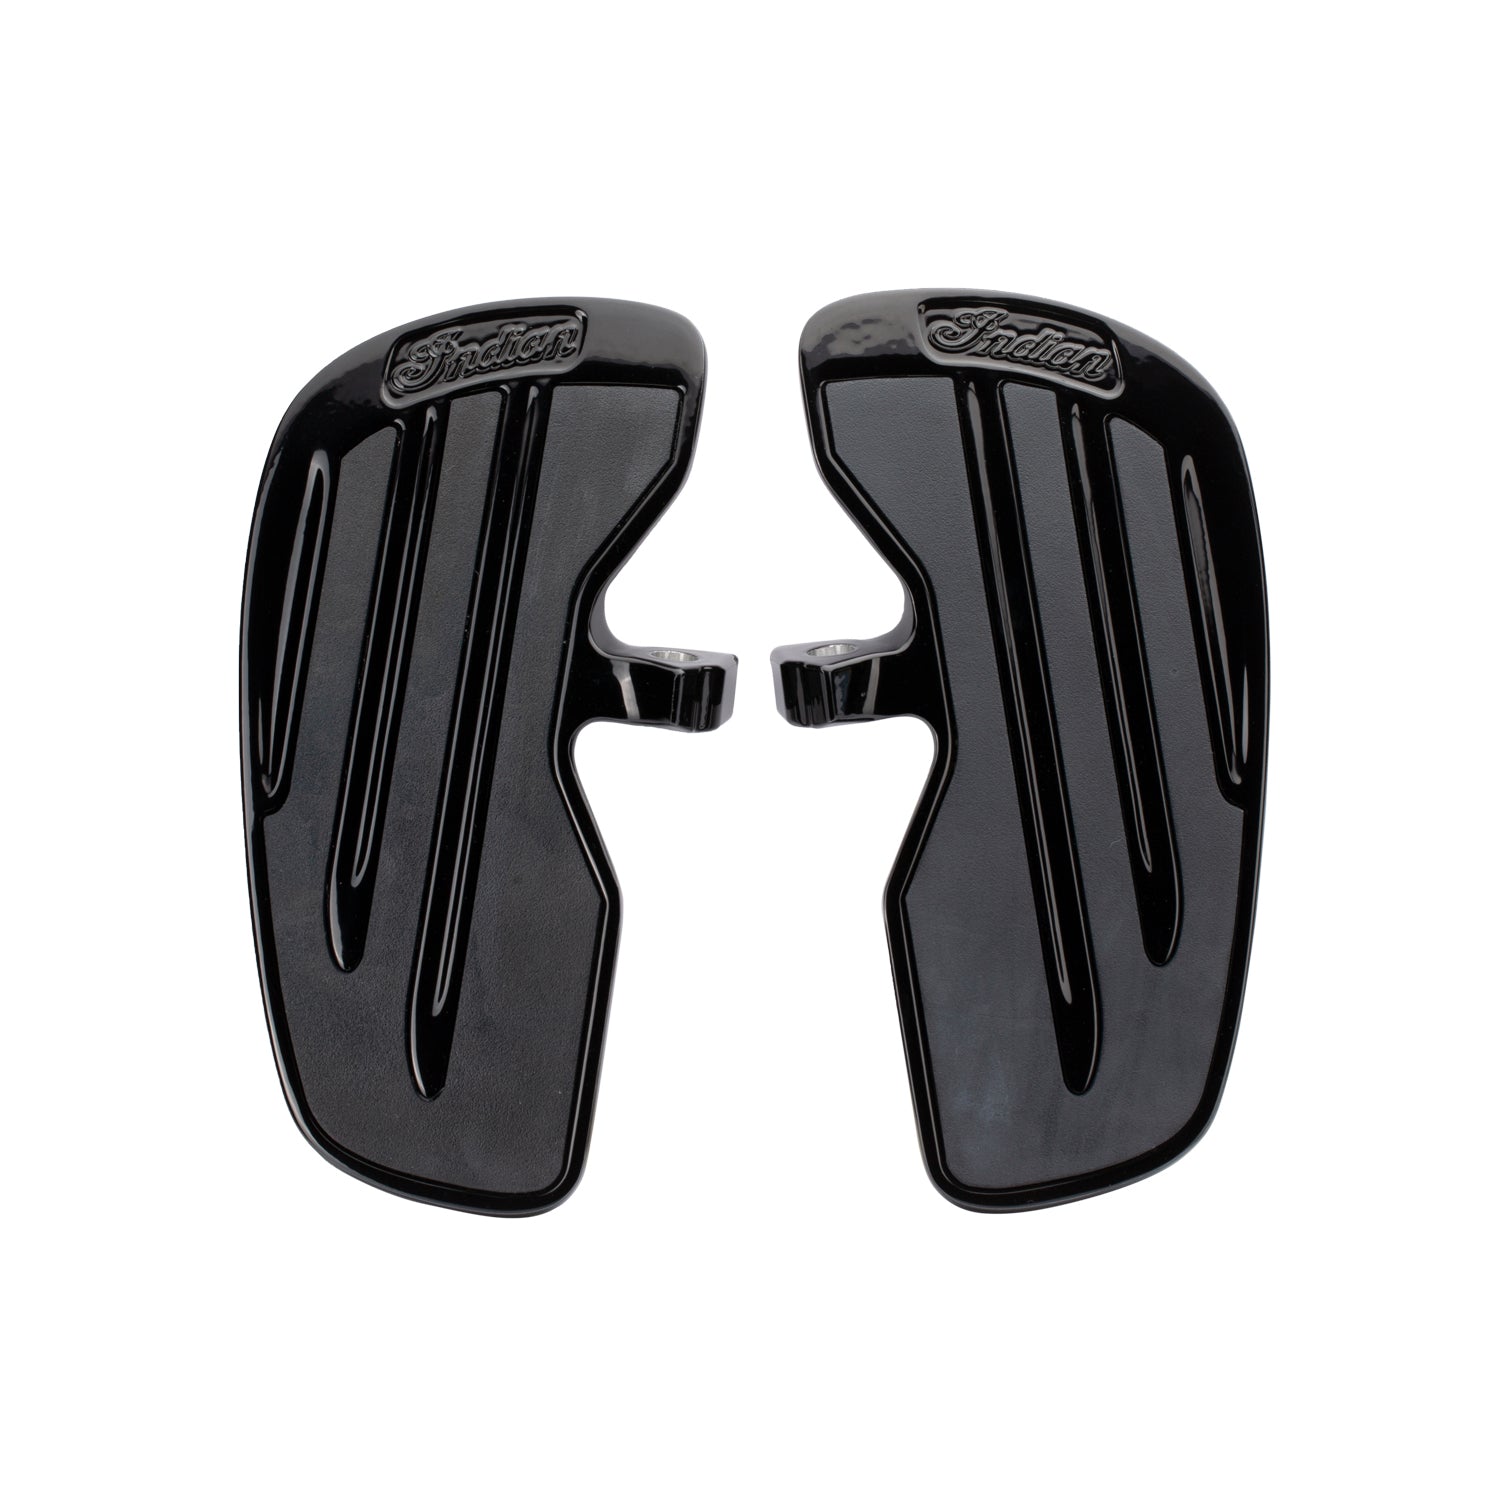 Rider Floorboards with Inlays in Gloss Black, Pair - 2883056-658